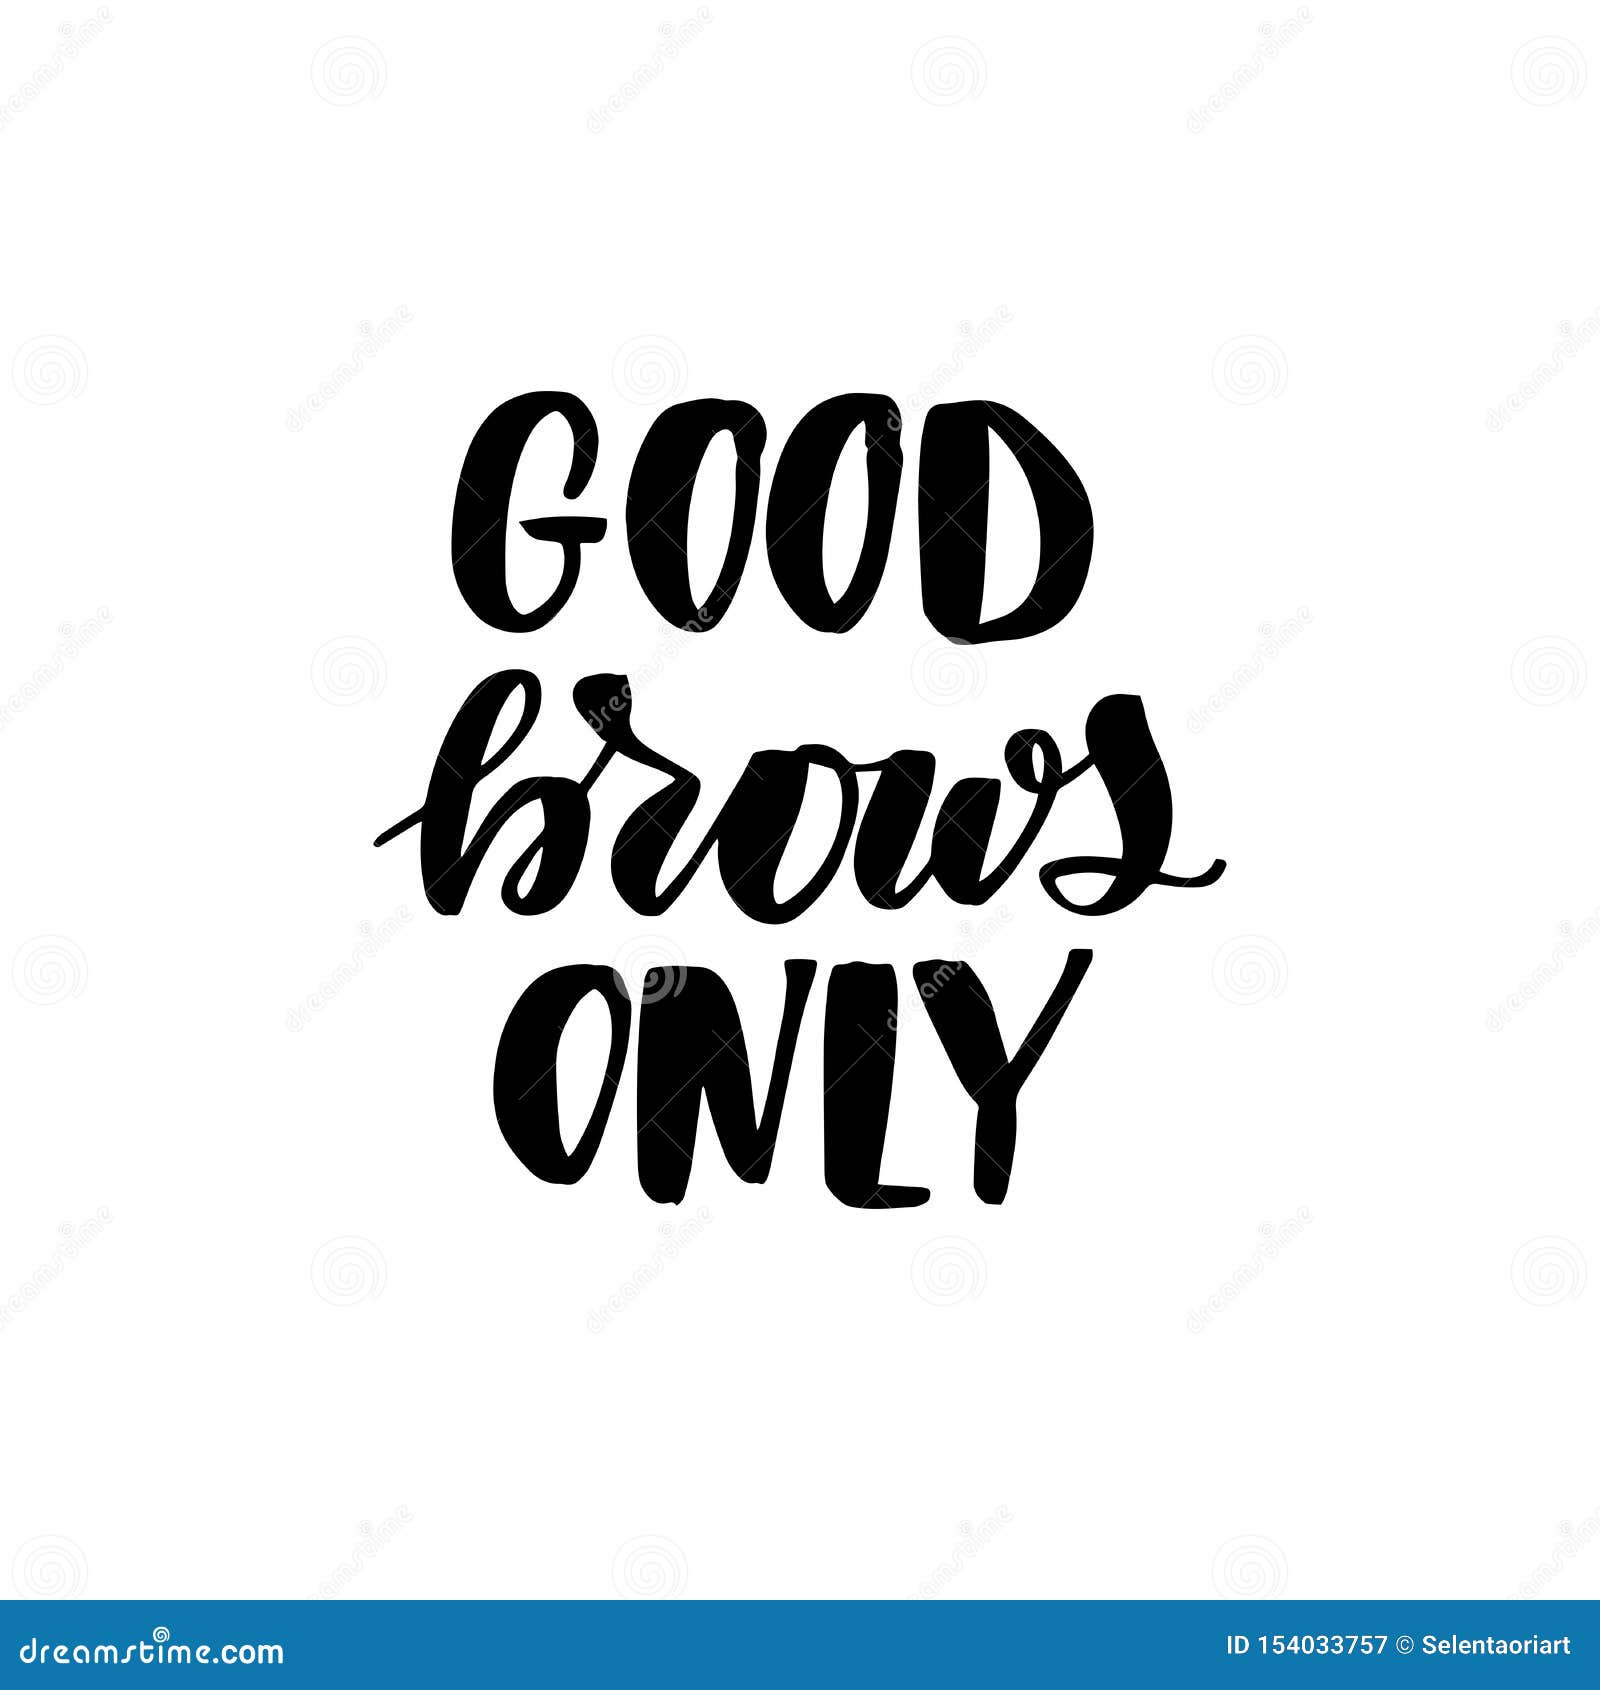 Good brows only stock vector. Illustration of badge - 154033757